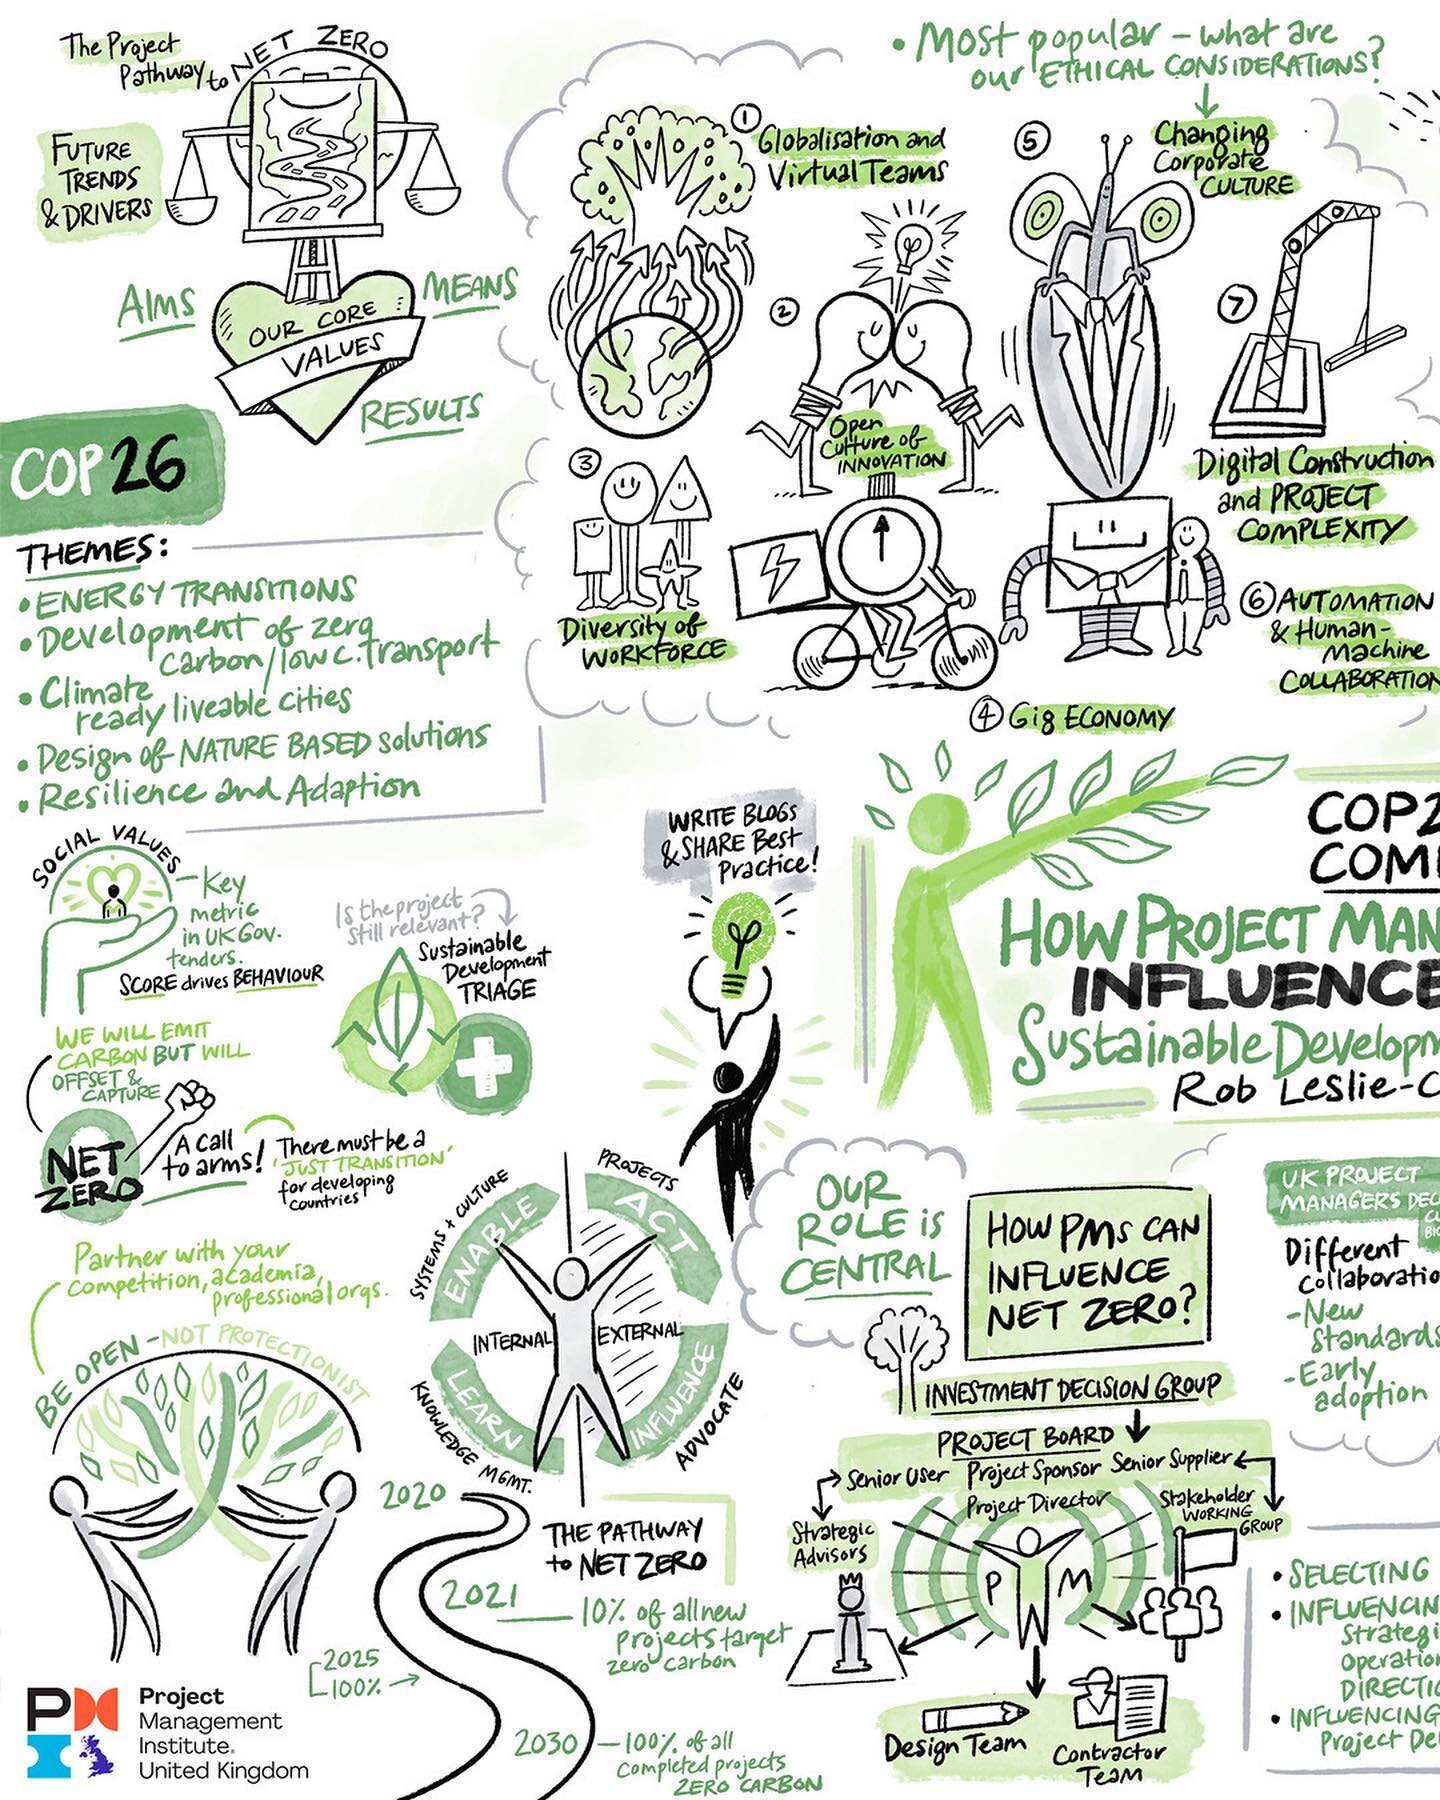 Was really cool scribing for Rob Leslie-Carter from Arup last week on the topic of project managers and the impact they can have environmentally. Understandably, there is an enormous amount a PM can do to make a real difference. Quite a bit of detail